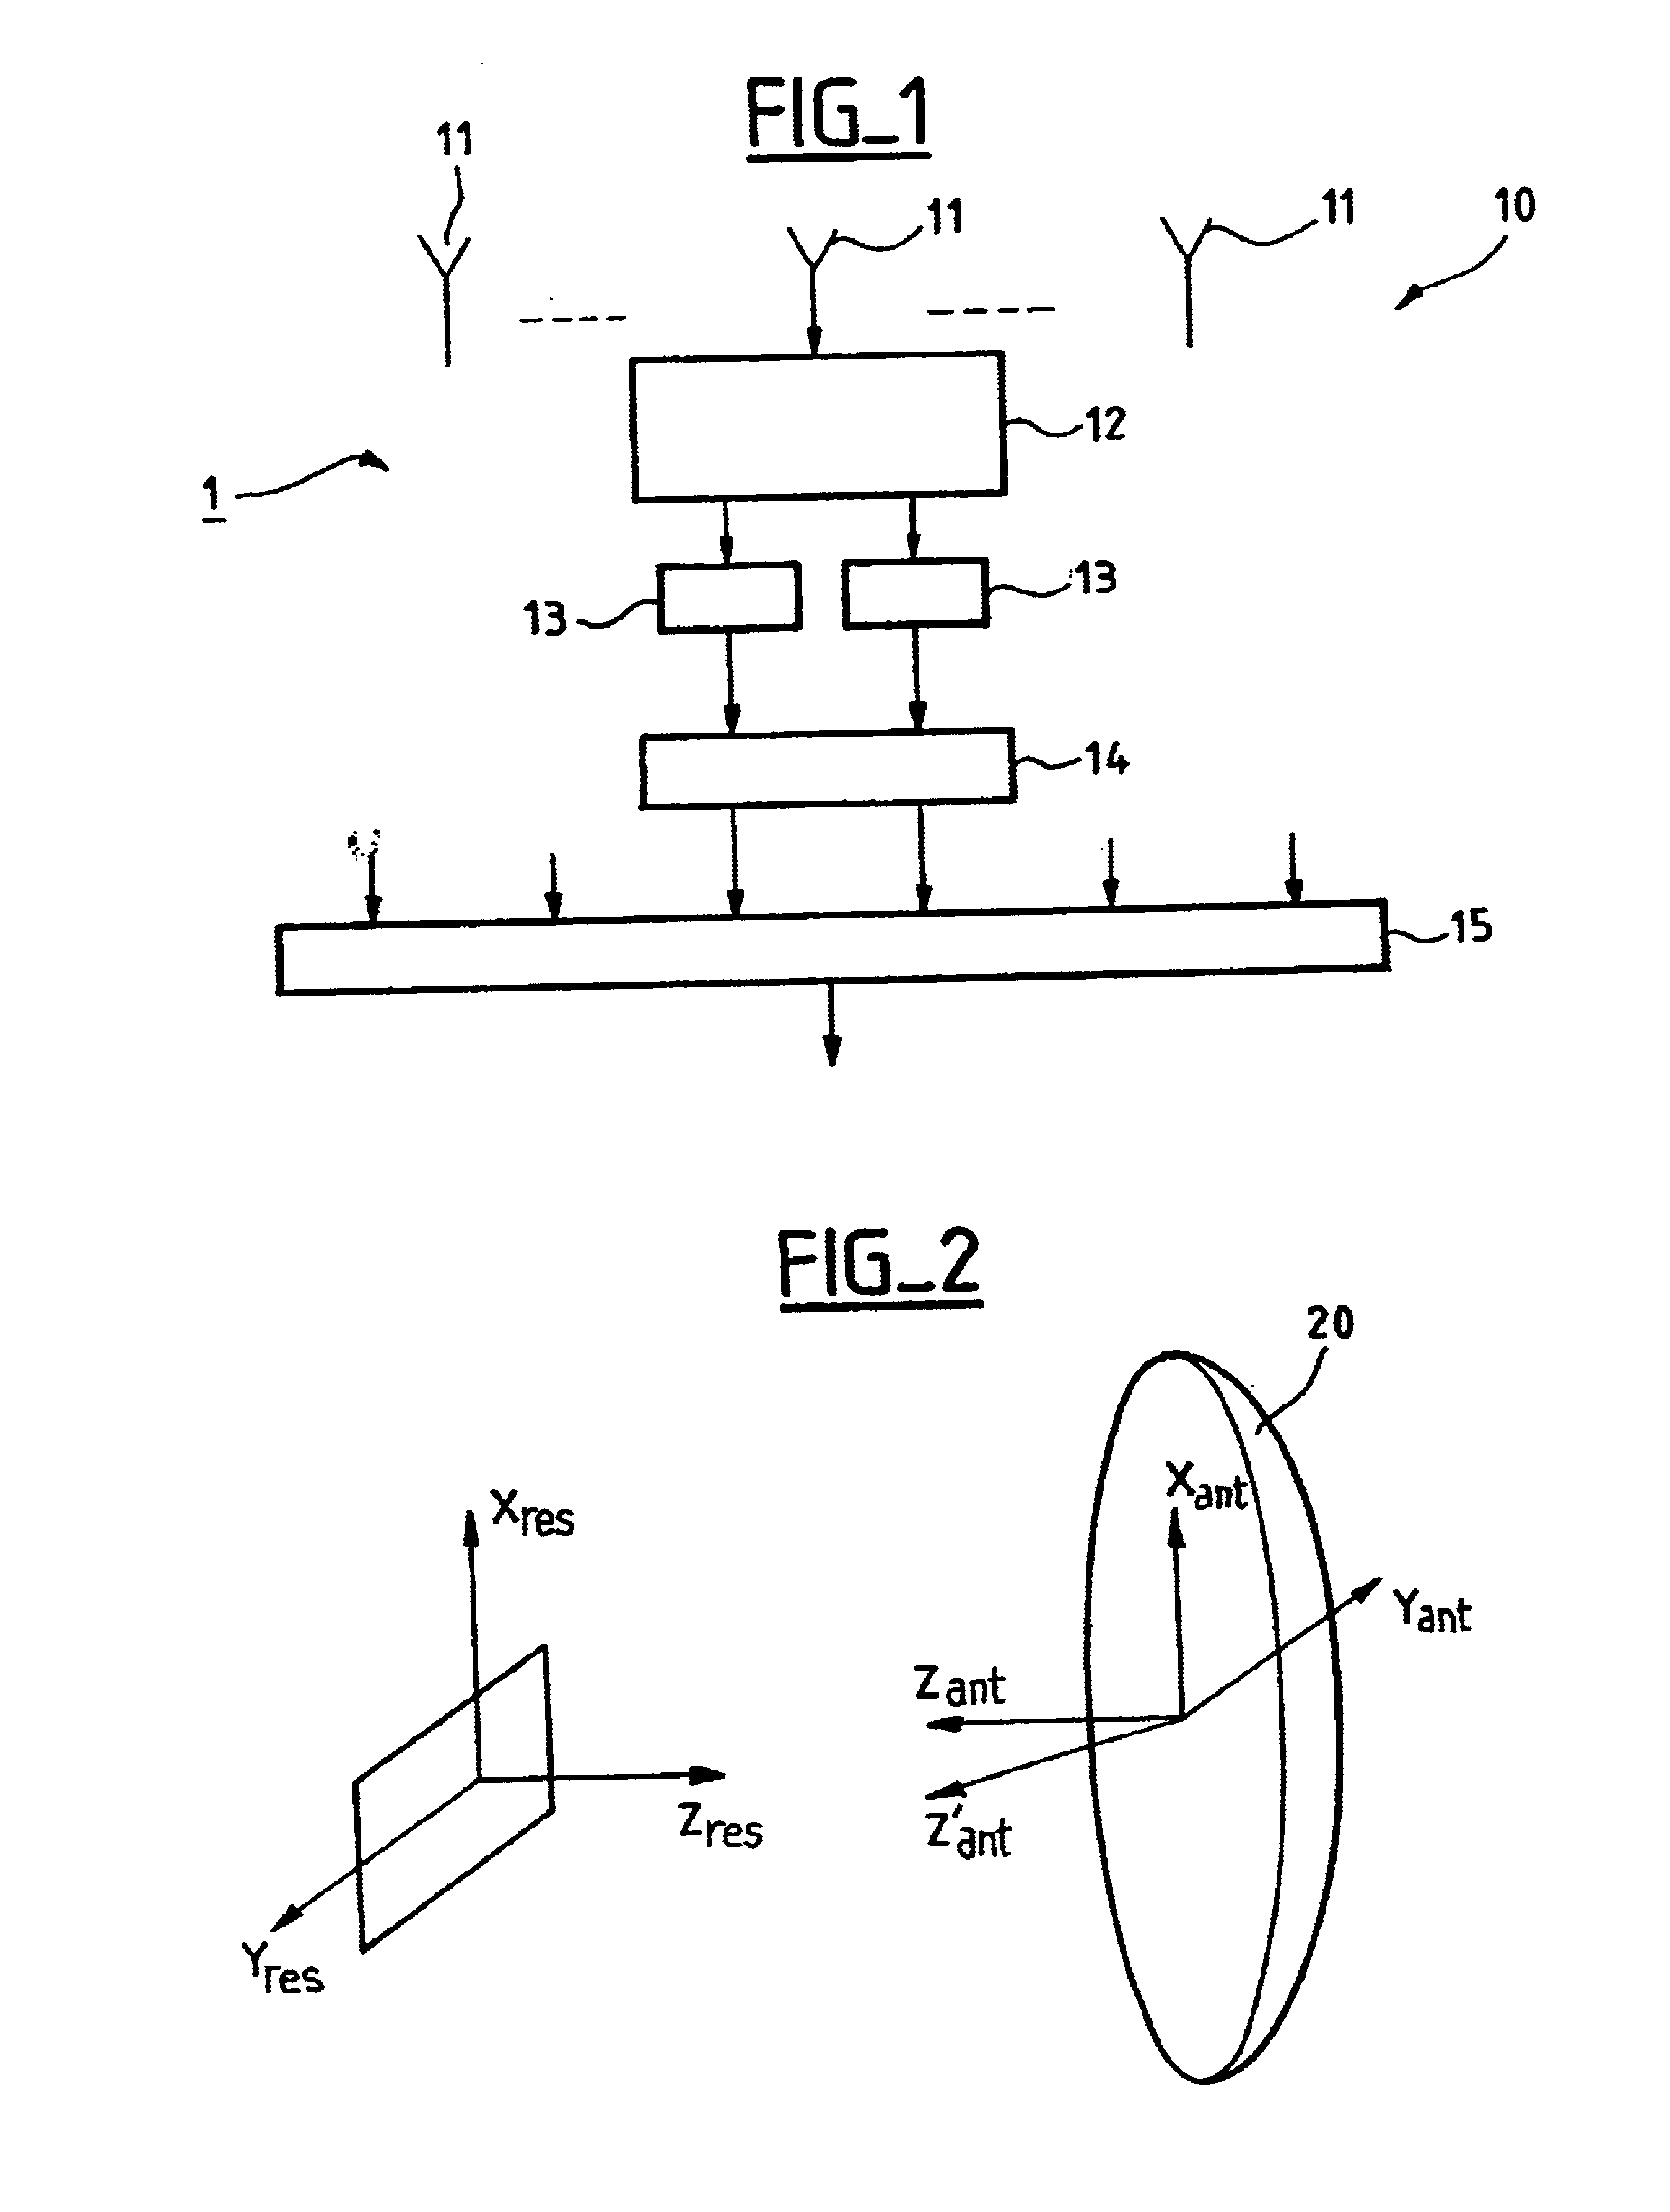 Method of repointing a reflector array antenna